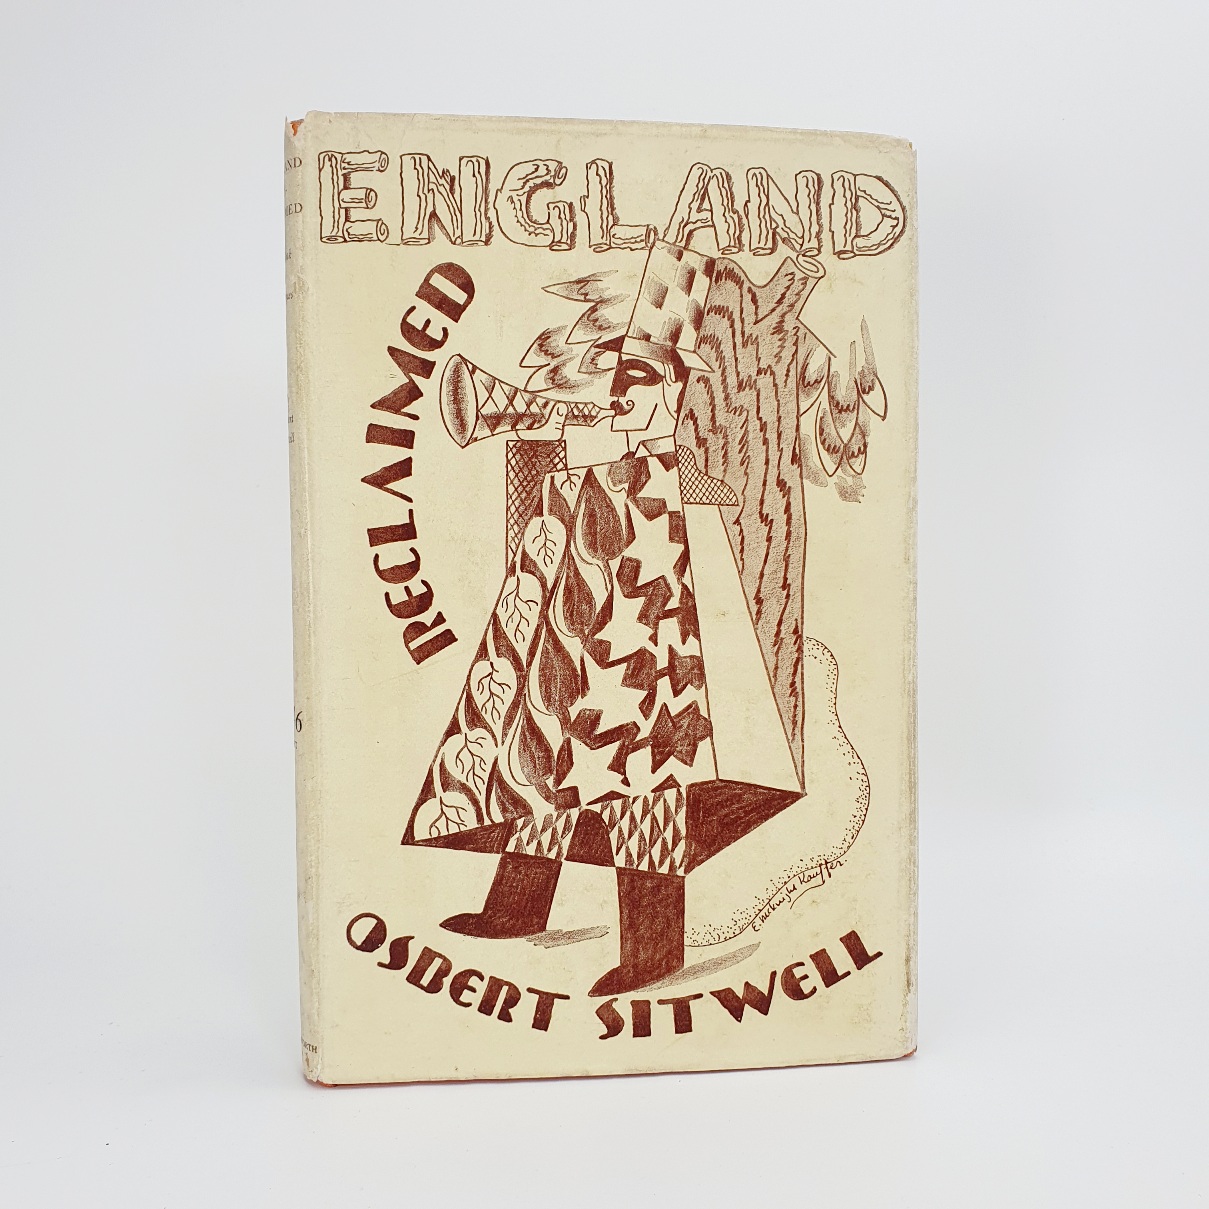 England Reclaimed. A Book of Eclogues